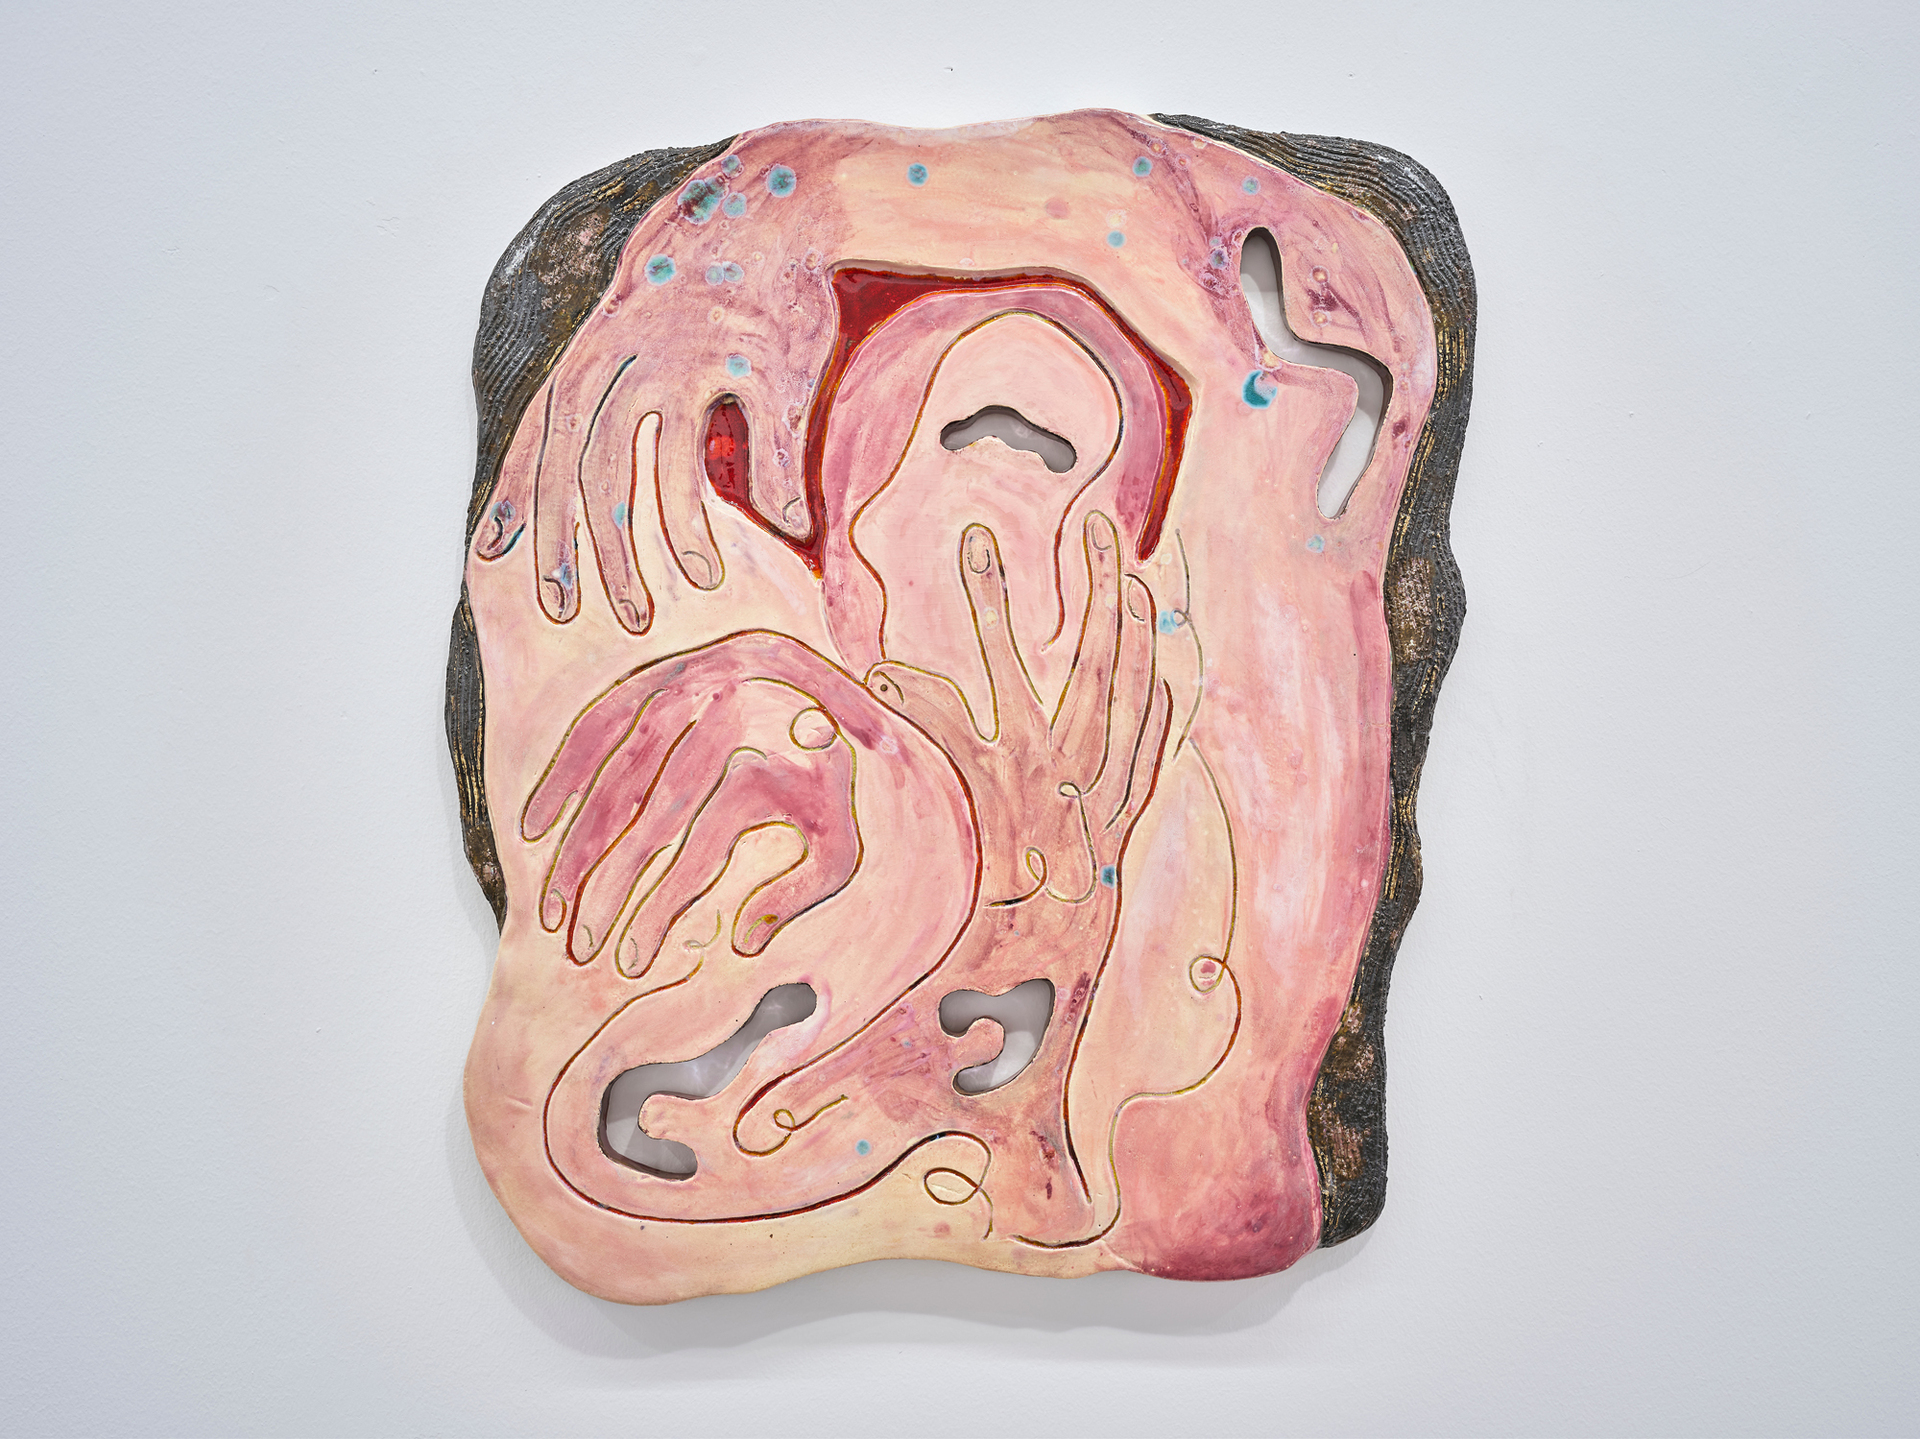 Monika Grabuschnigg, Place yourself where my eyes can feel where my skin can see, 2019, Glazed earthenware, 62 x 53 x 2.5 cm